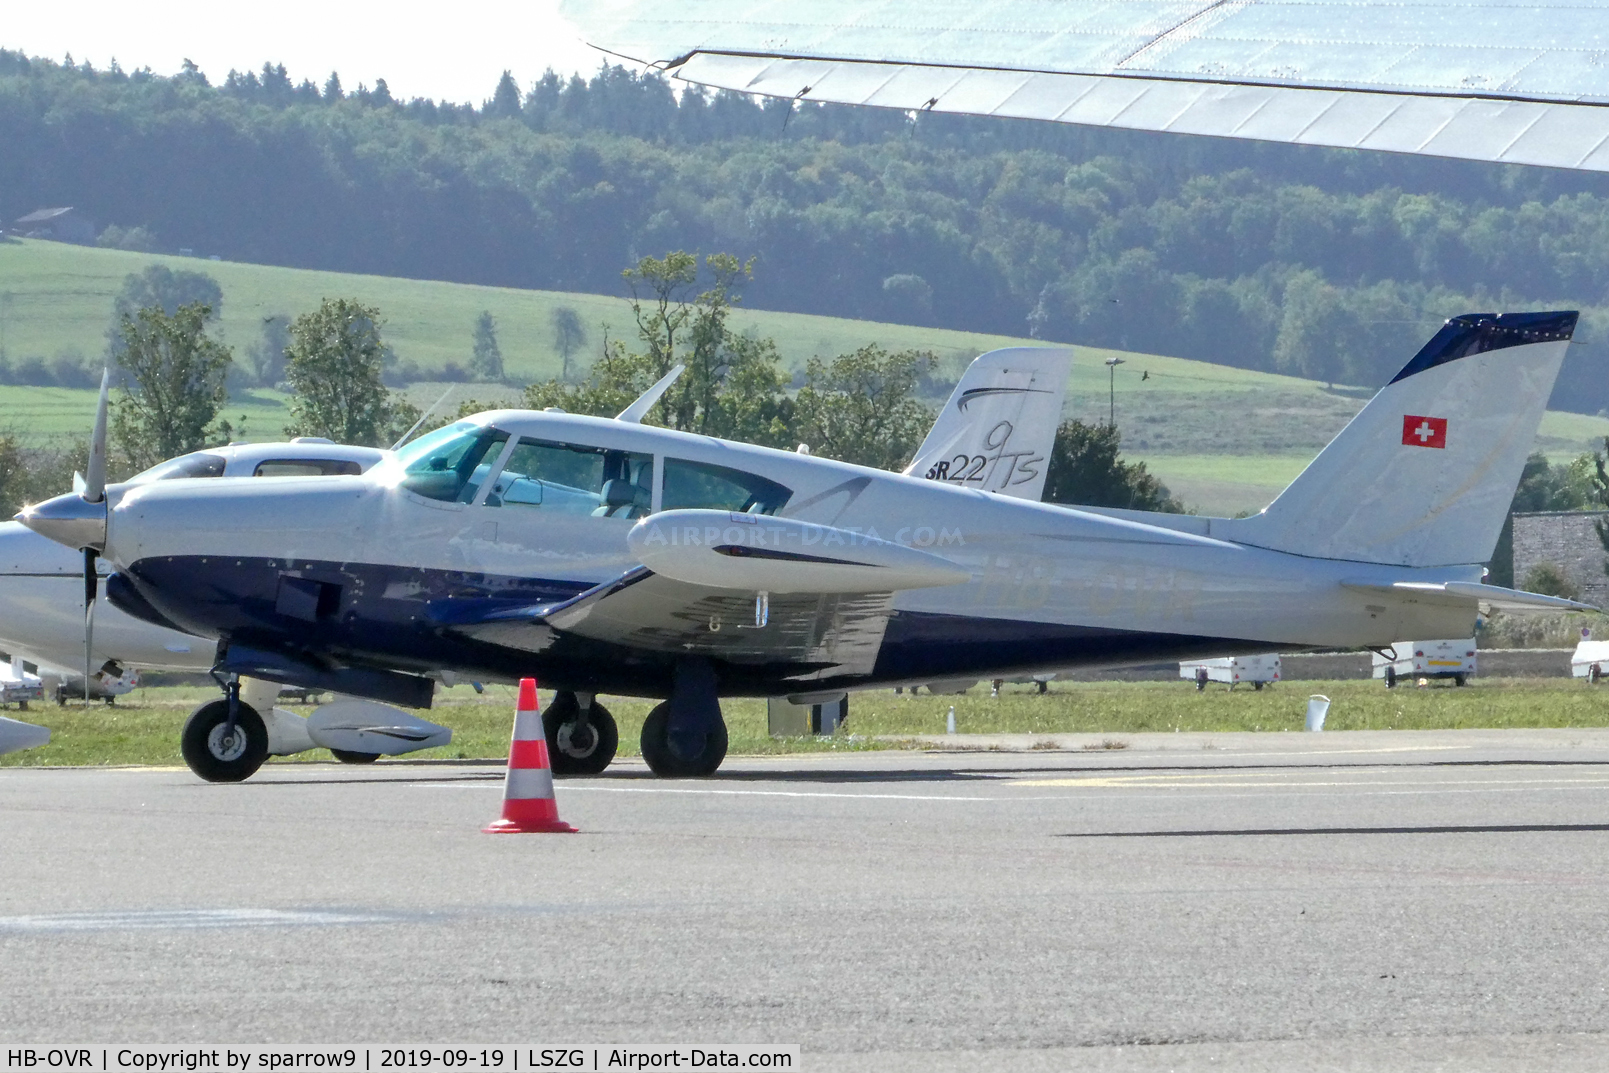 HB-OVR, 1963 Piper PA-24-250 Comanche C/N 24-1595, At Grenchen. HB-registered since 1963-05-11.